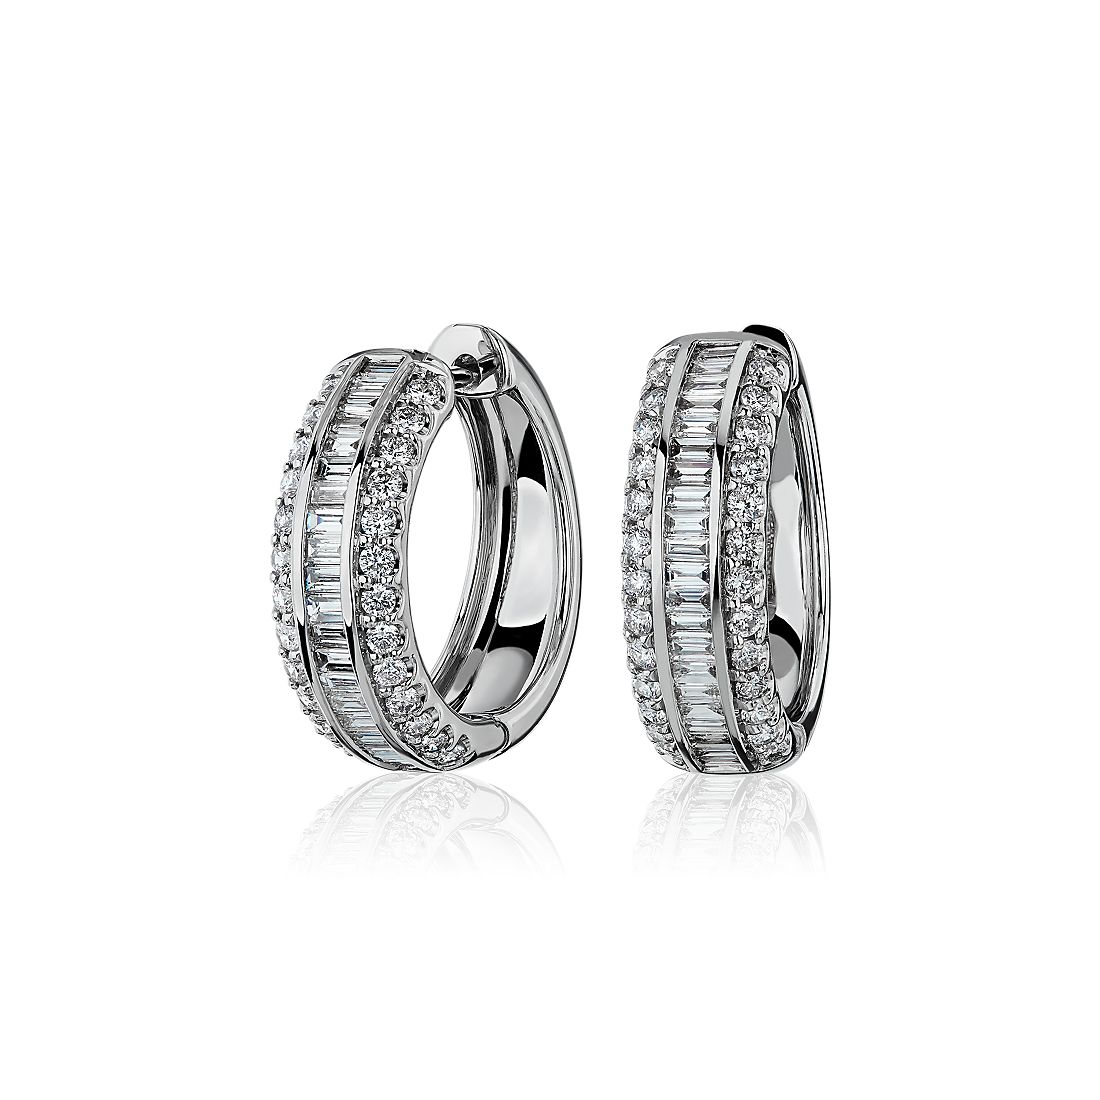 Three Row Baguette and Round Hoop Earrings in 14k White Gold (1 ct. tw.)